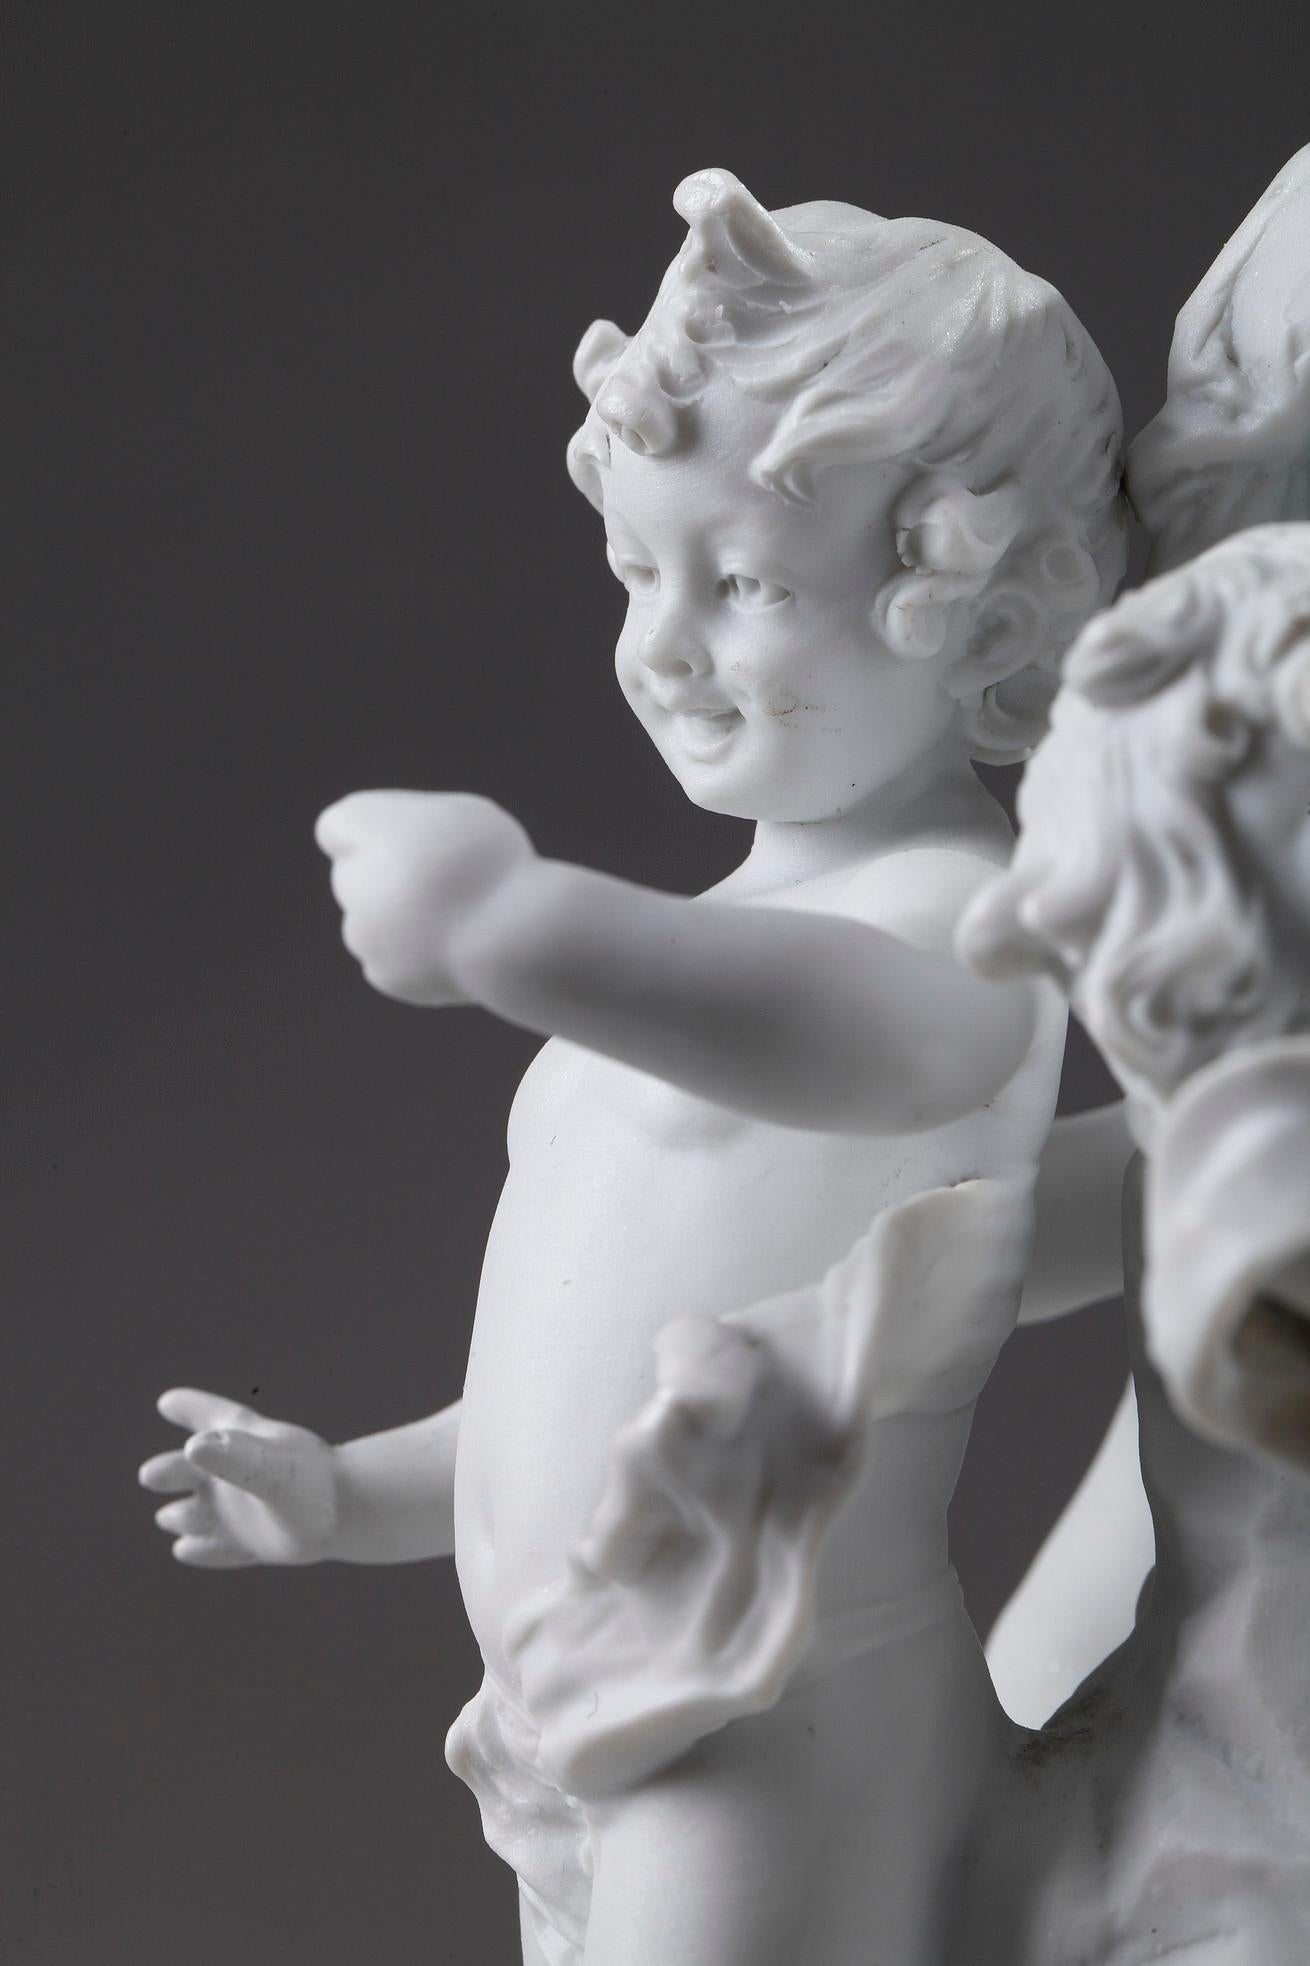 Small bisque porcelain figurines featuring five putti holding a cup, an insect and a shell. Four of them are dancing around a central rock, topped by a fifth cupid, crowned with vine leaves and holding a cup. The crown of vine branches and the cup